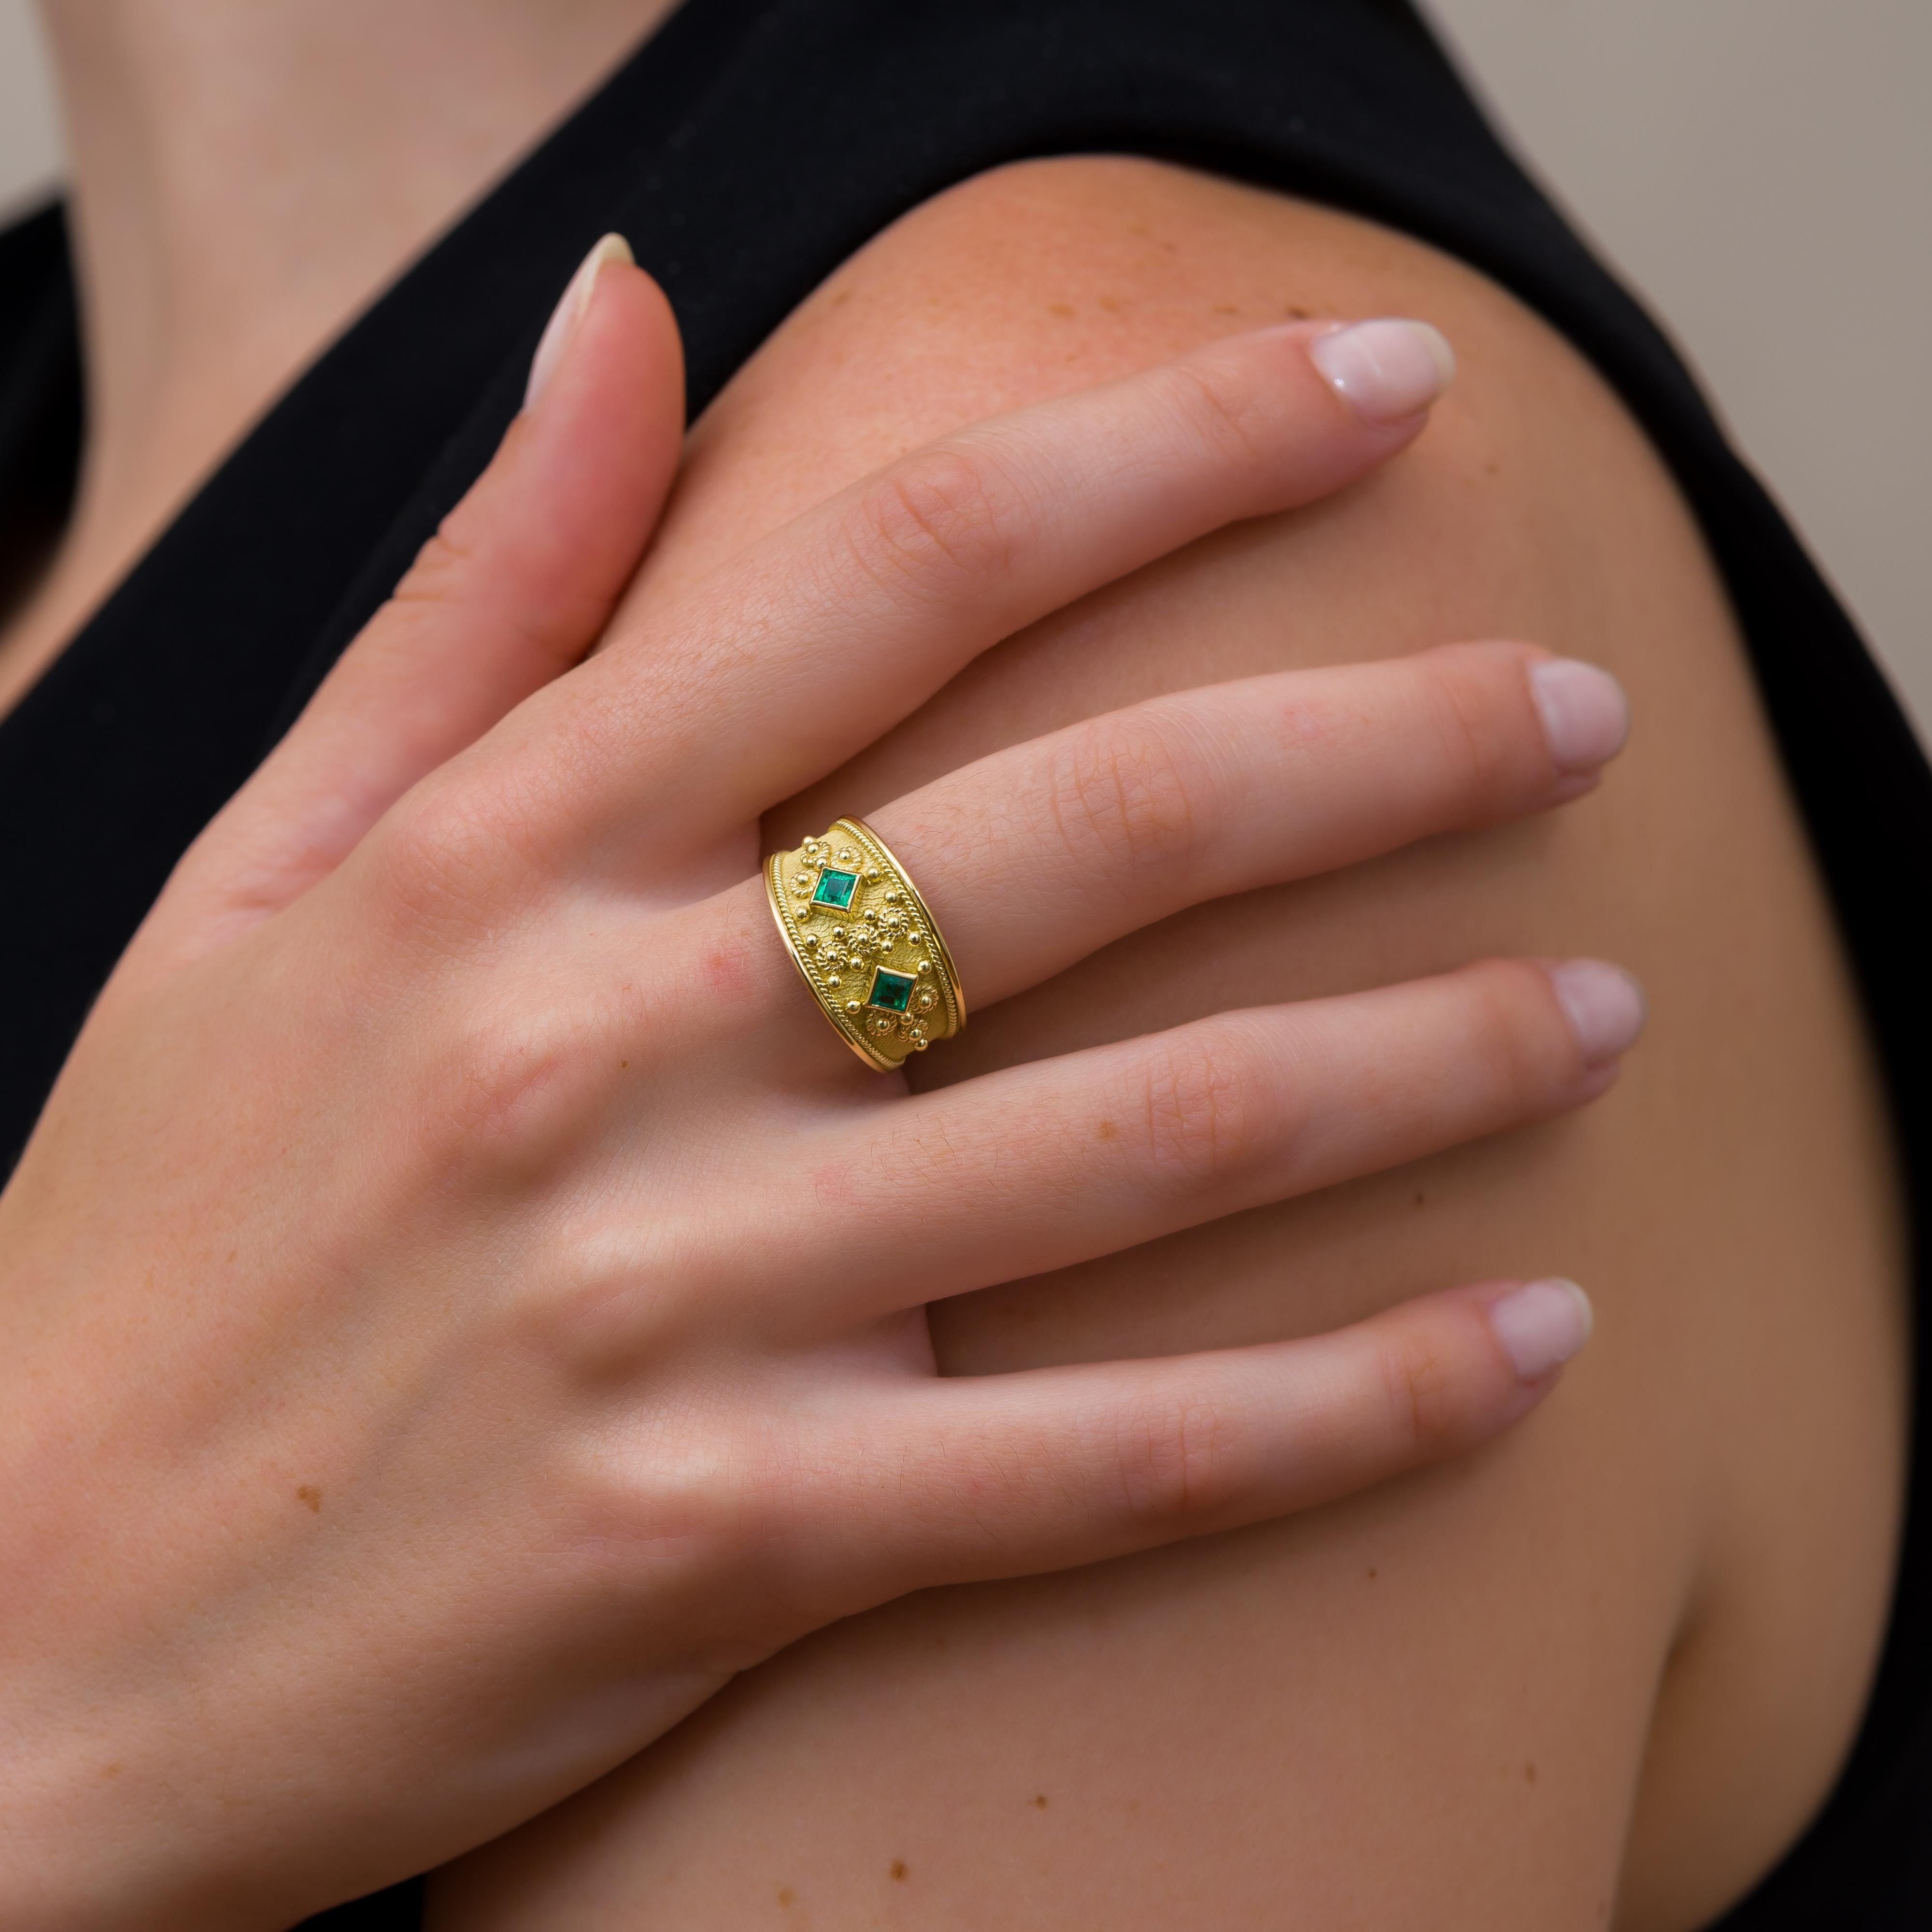 Behold a mesmerizing ring adorned with two square emeralds, delicately encased in intricate twisted gold rope details and embellished with granulations—a masterpiece of timeless sophistication and meticulous craftsmanship.

100% handmade in our